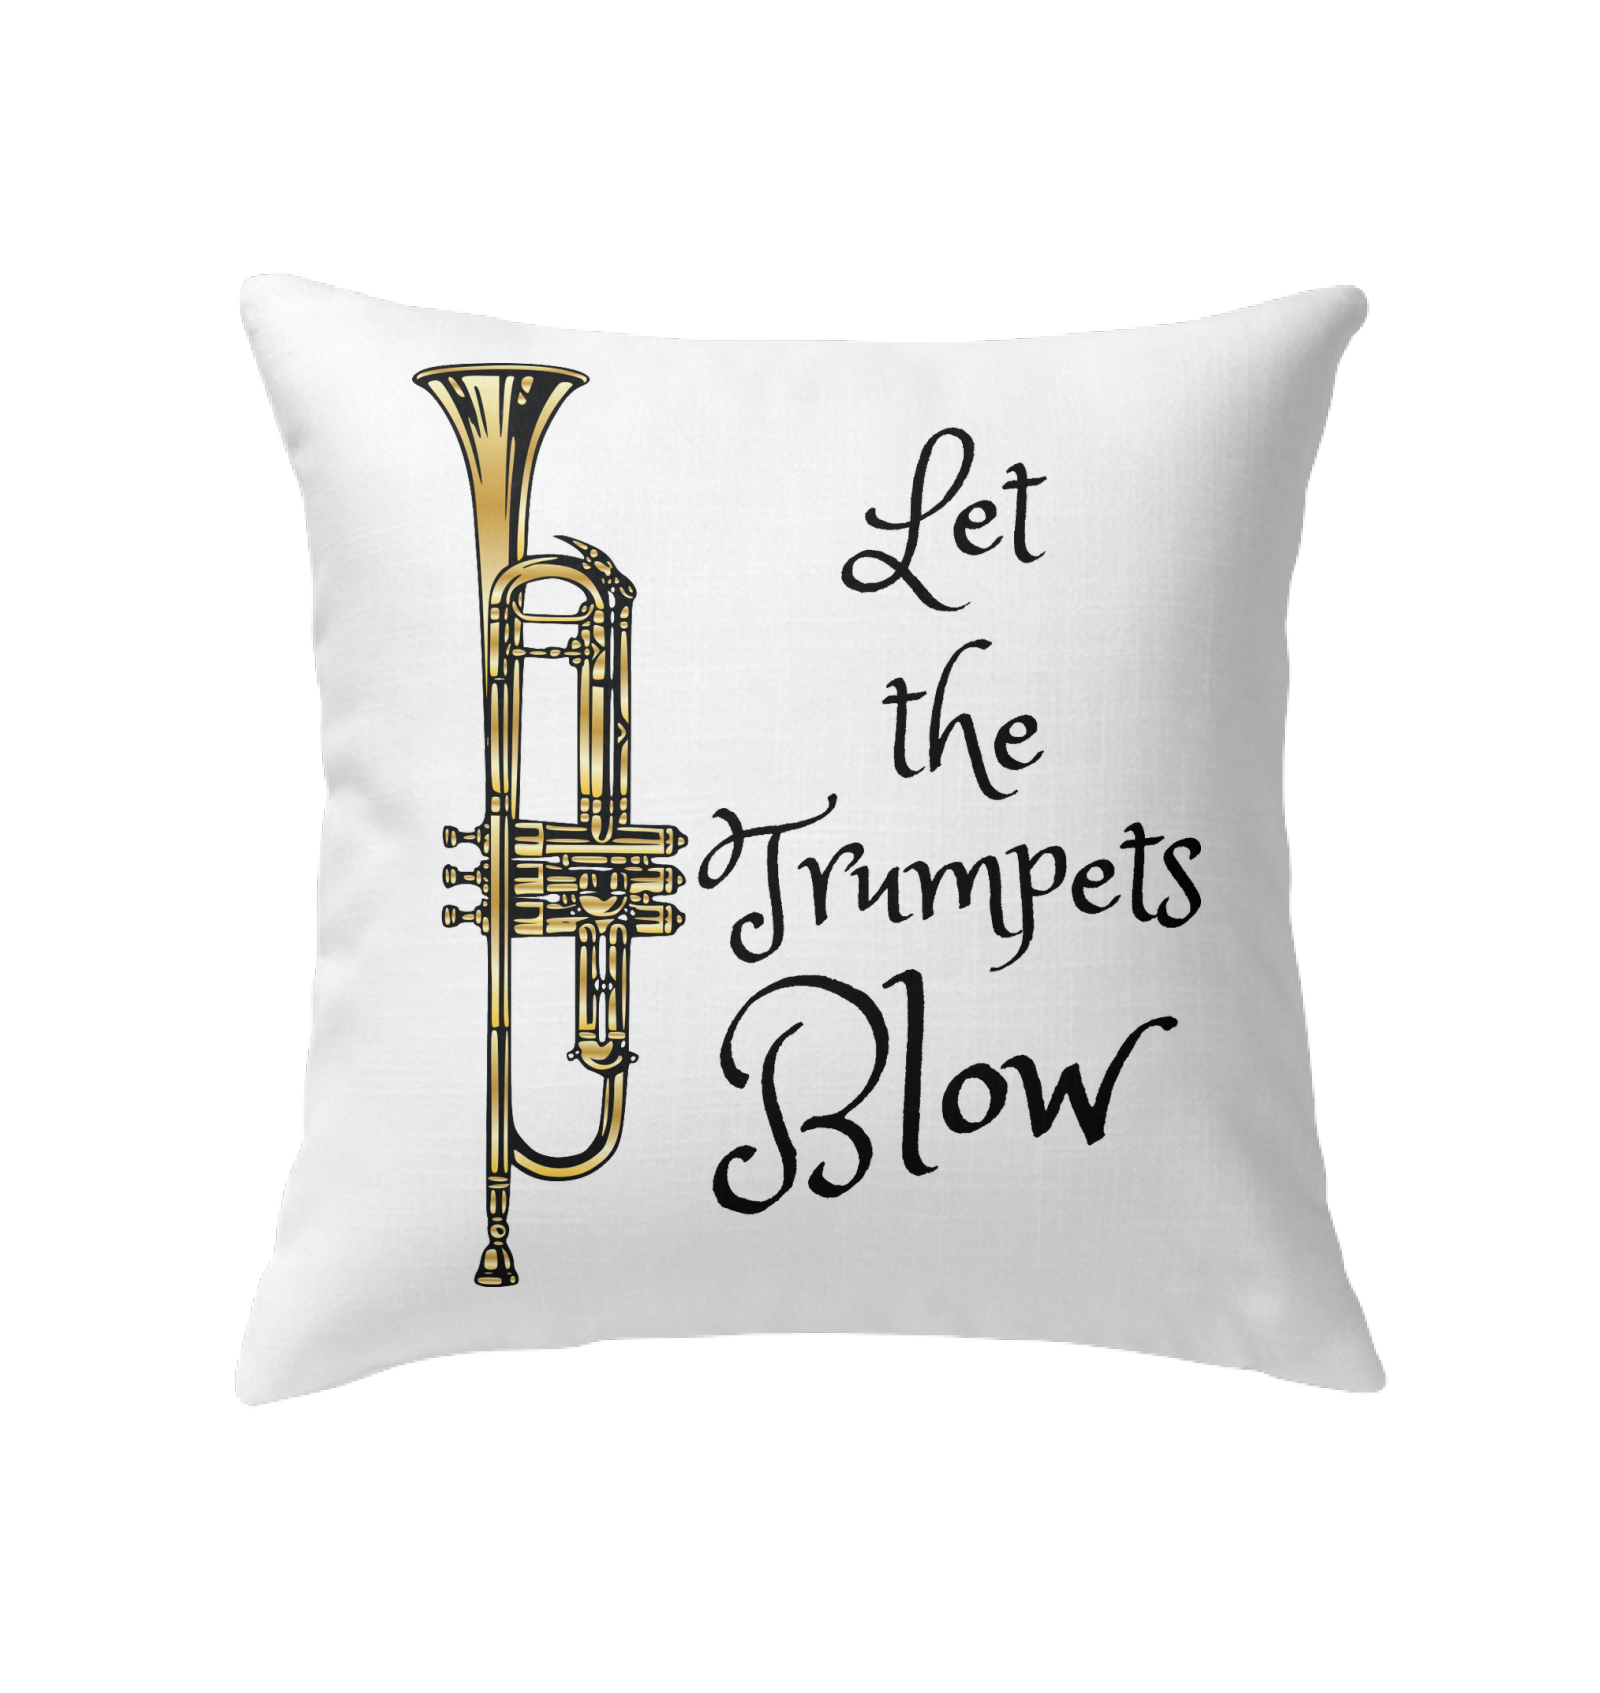 Let the Trumpets Blow - Indoor Pillow